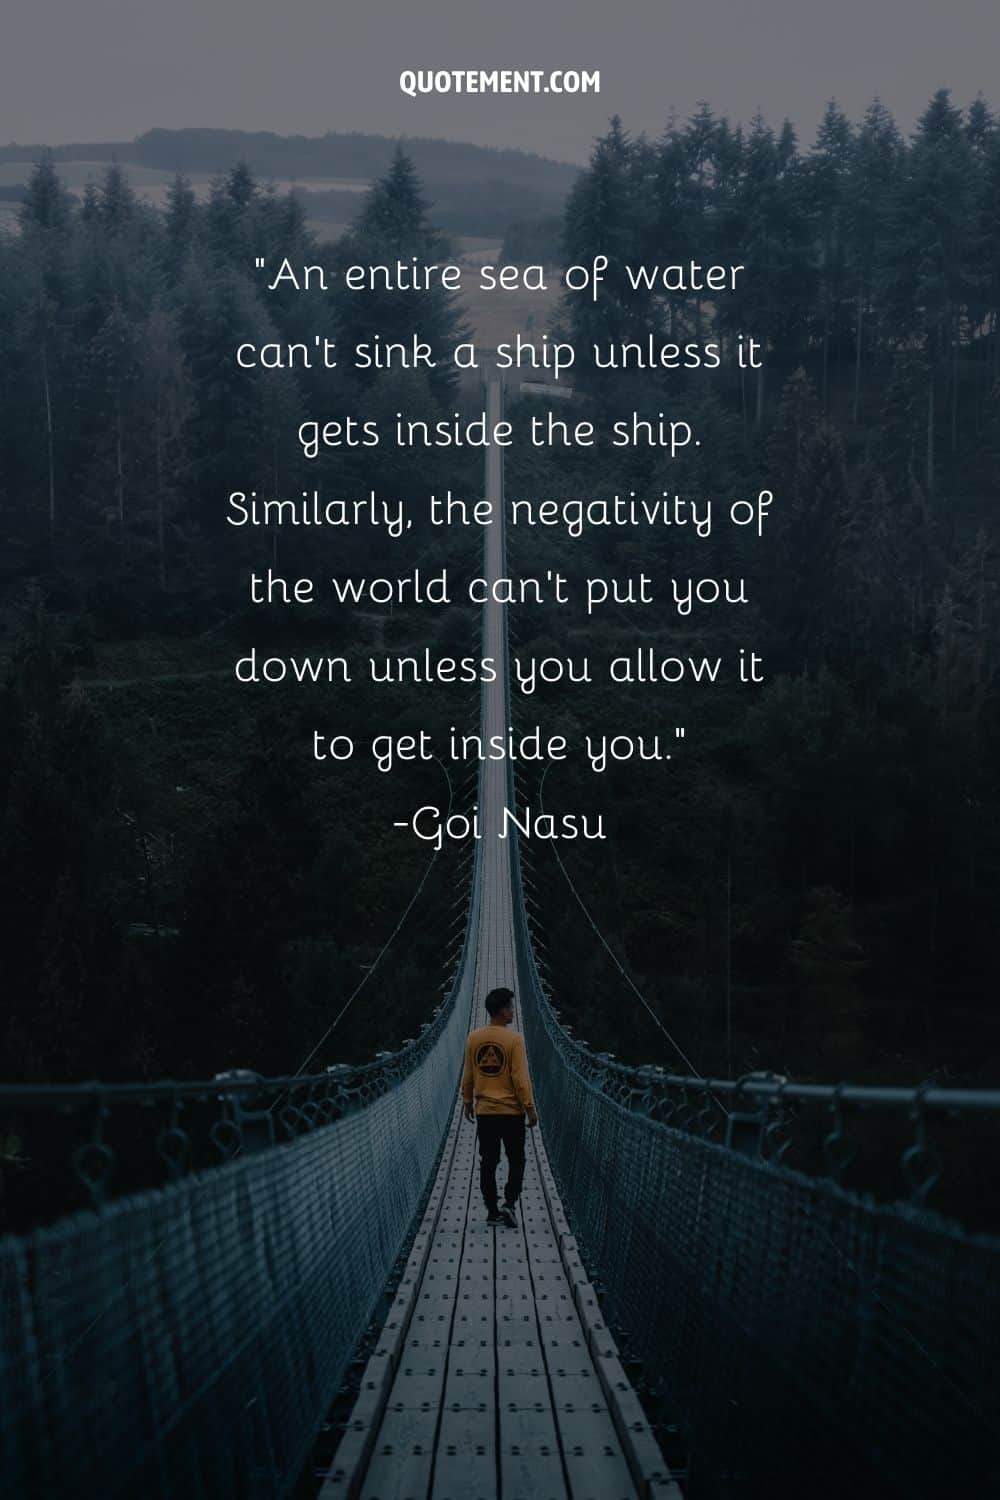 An entire sea of water can’t sink a ship unless it gets inside the ship